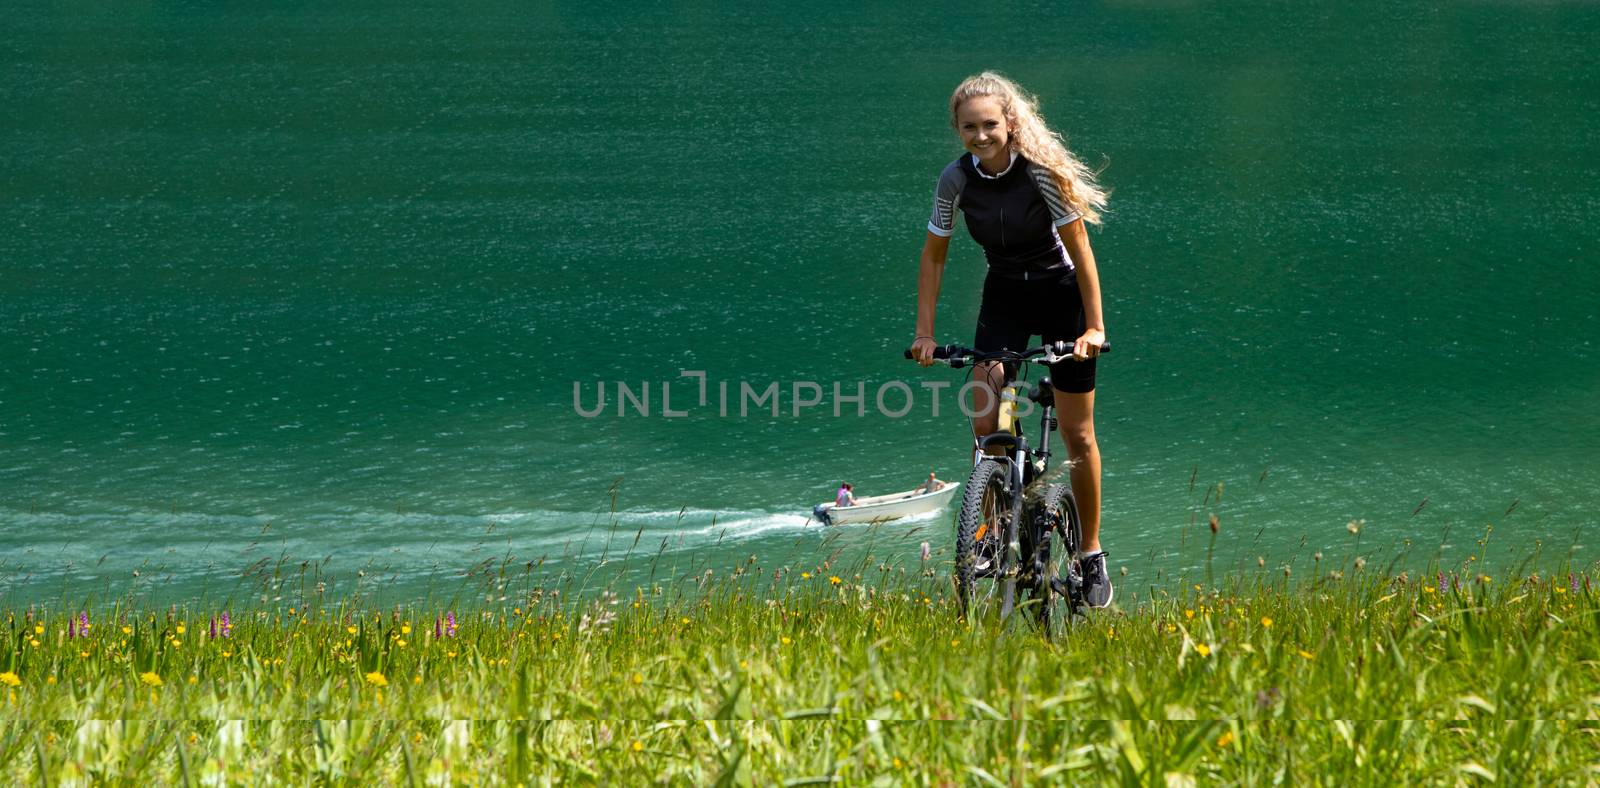 Life style woman with long blond hair on mountain bike in Swiss by PeterHofstetter